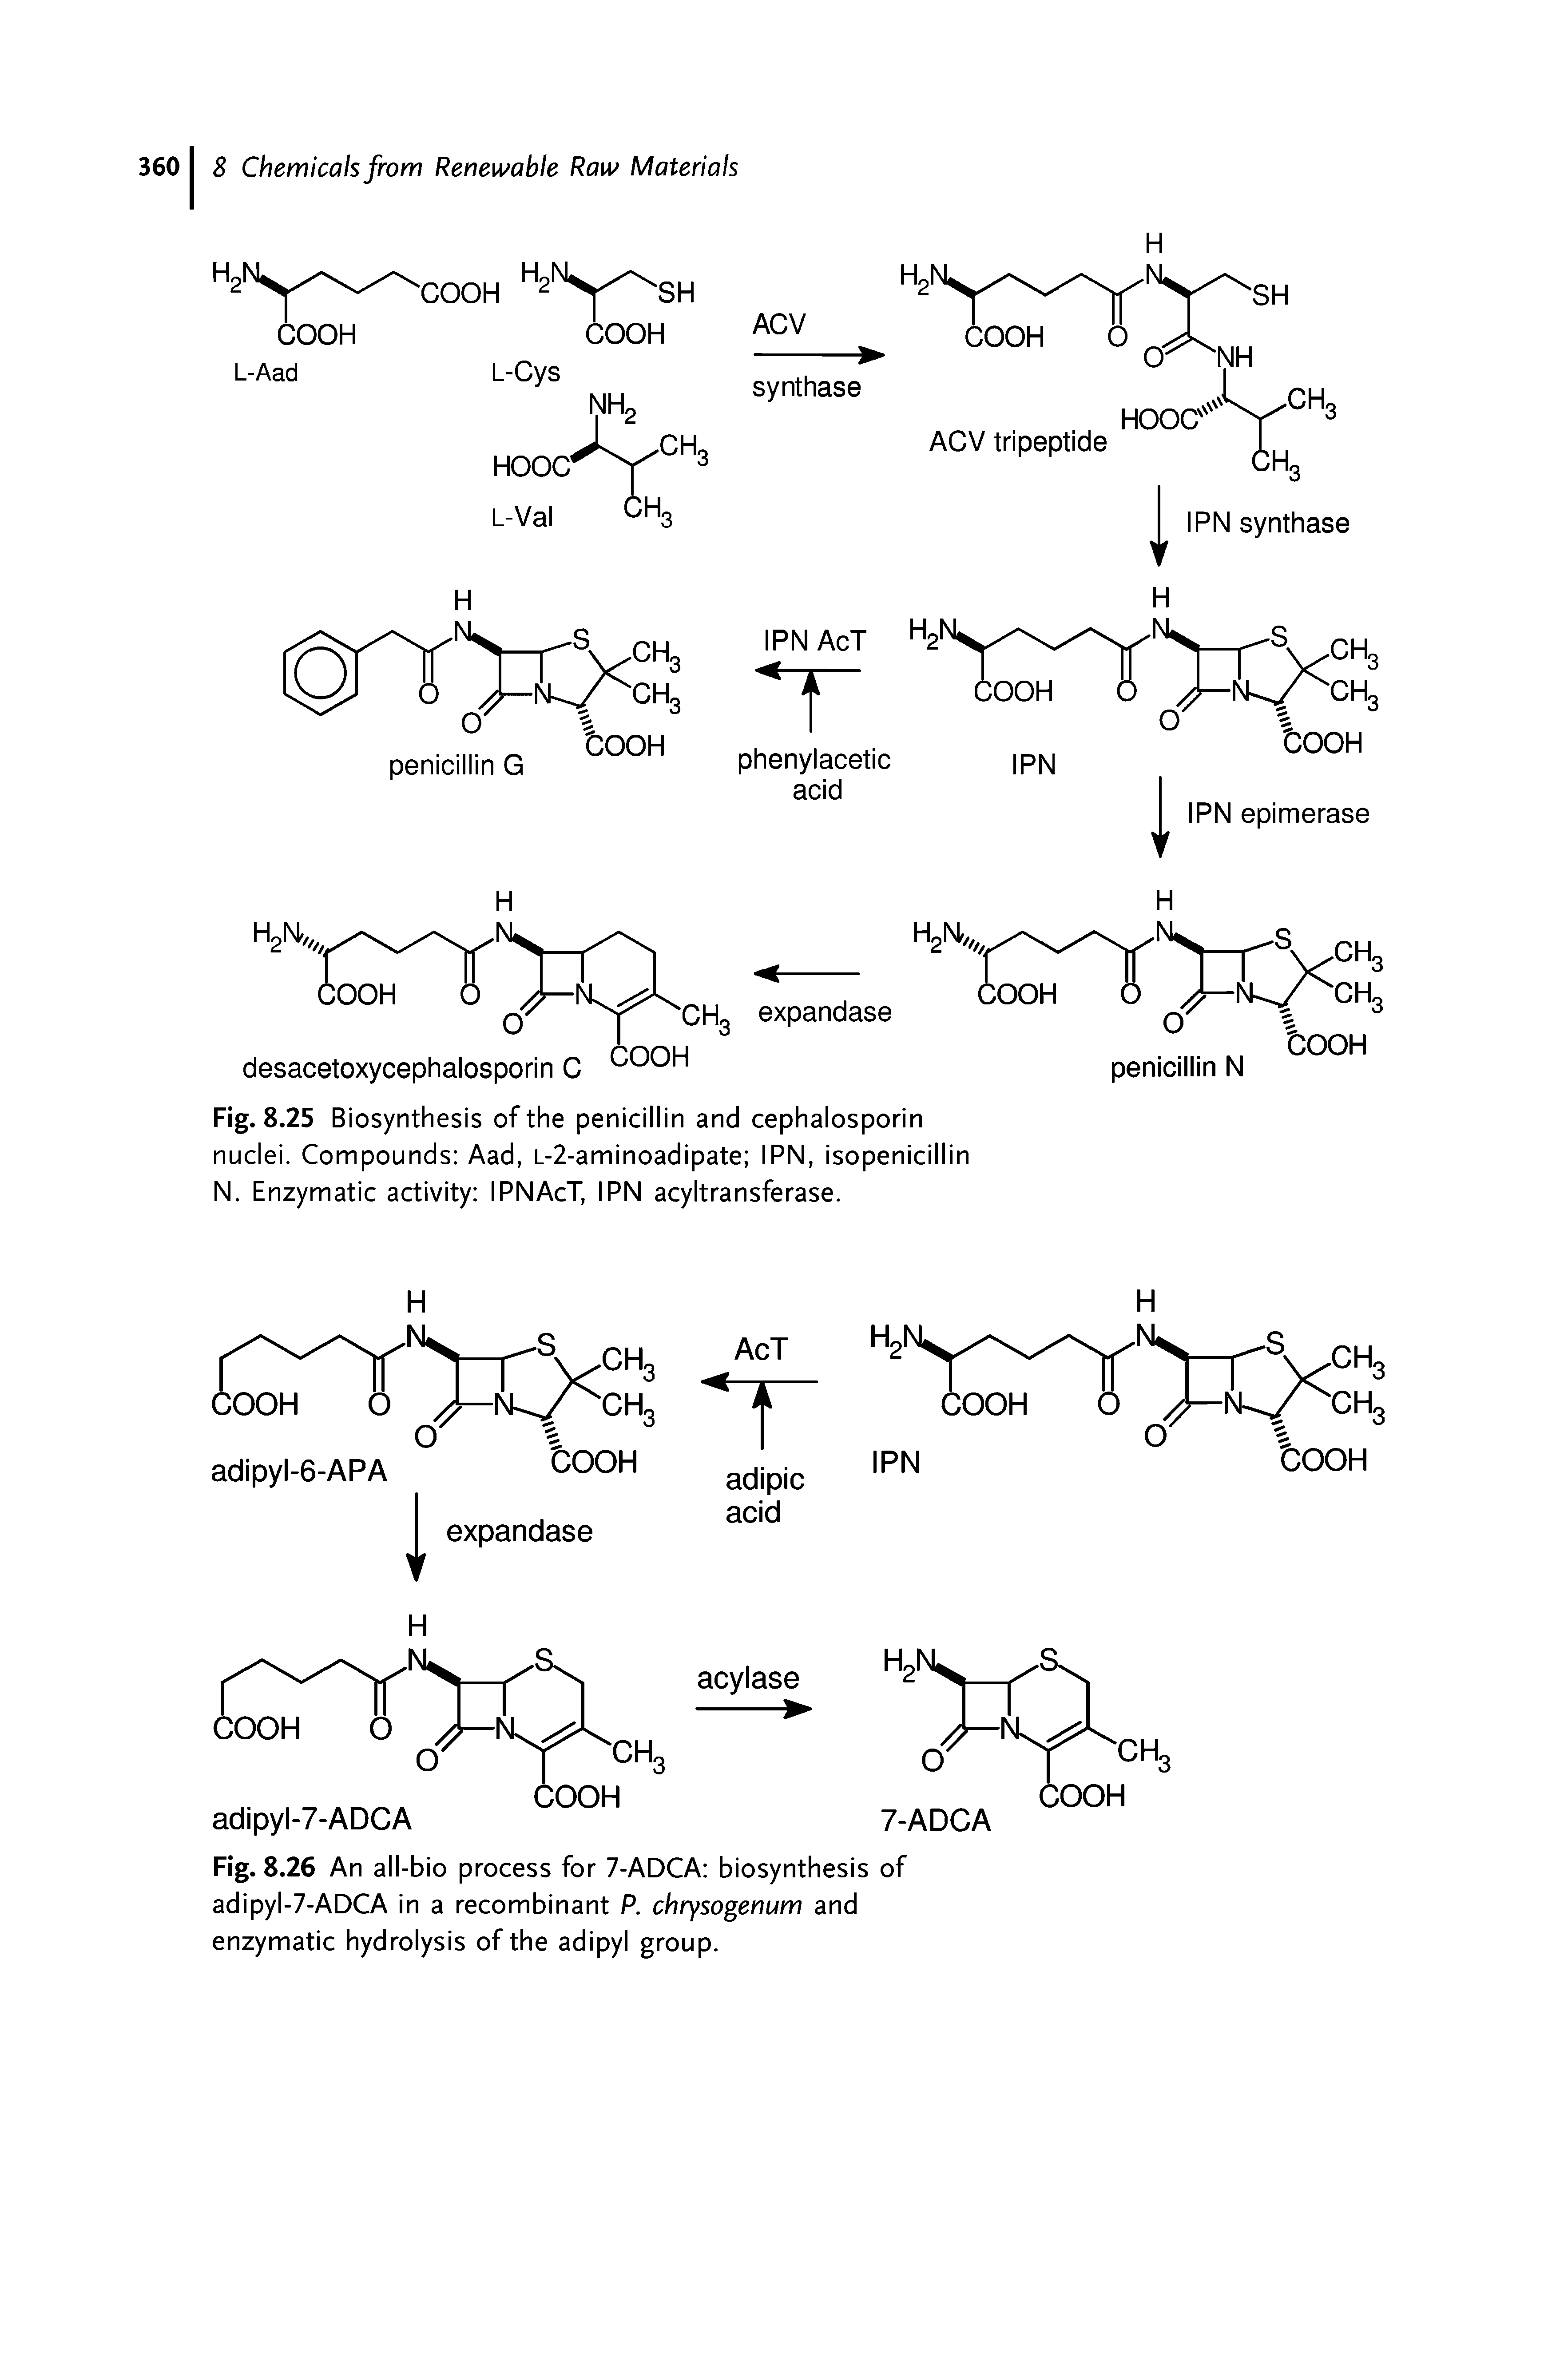 Fig. 8.25 Biosynthesis of the penicillin and cephalosporin nuclei. Compounds Aad, L-2-aminoadipate IPN, isopenicillin N. Enzymatic activity IPN AcT, IPN acyltransferase.